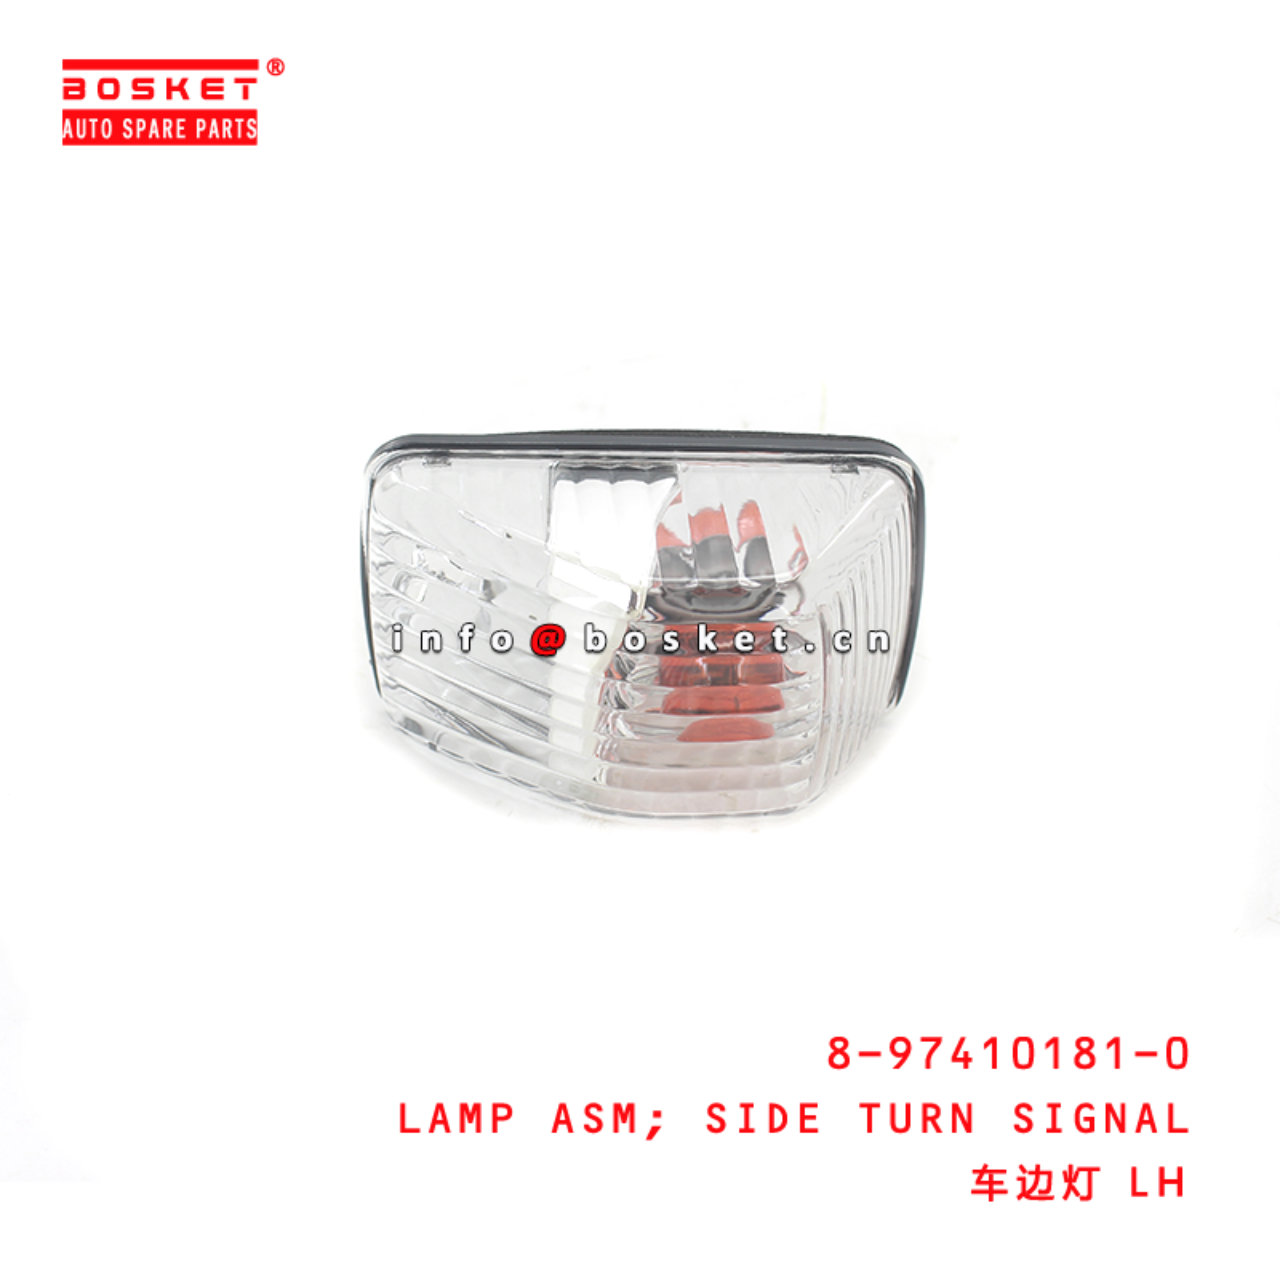 8-97410181-0 Side Turn Signal Lamp Assembly suitable for ISUZU 700P 8974101810